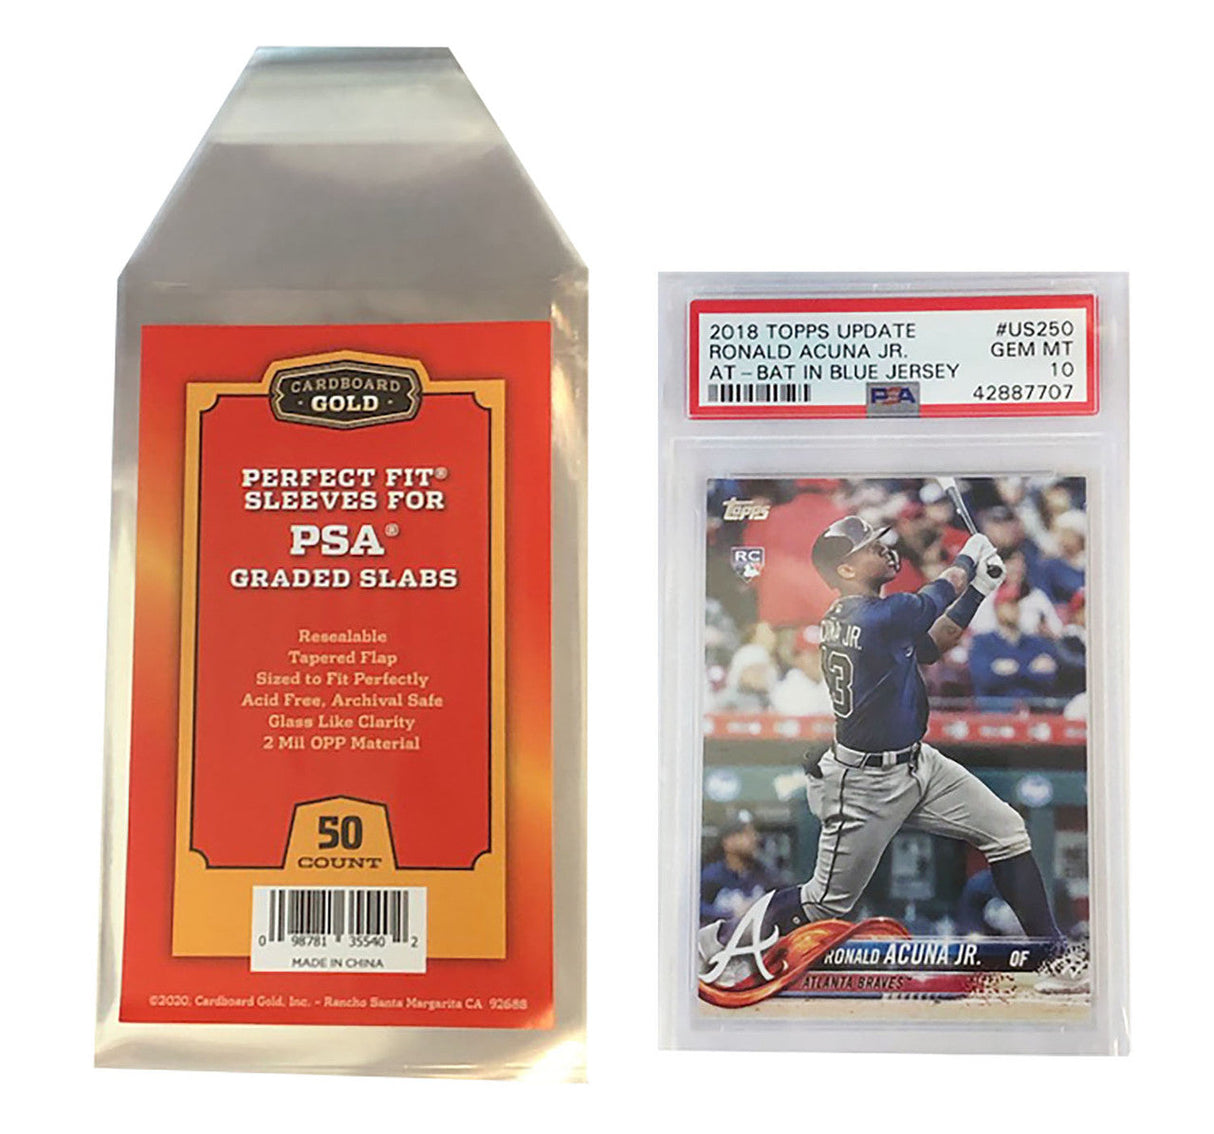 2500ct Case Perfect Fit Graded Cards Sleeves PSA Size No Logo - Cardboard Gold